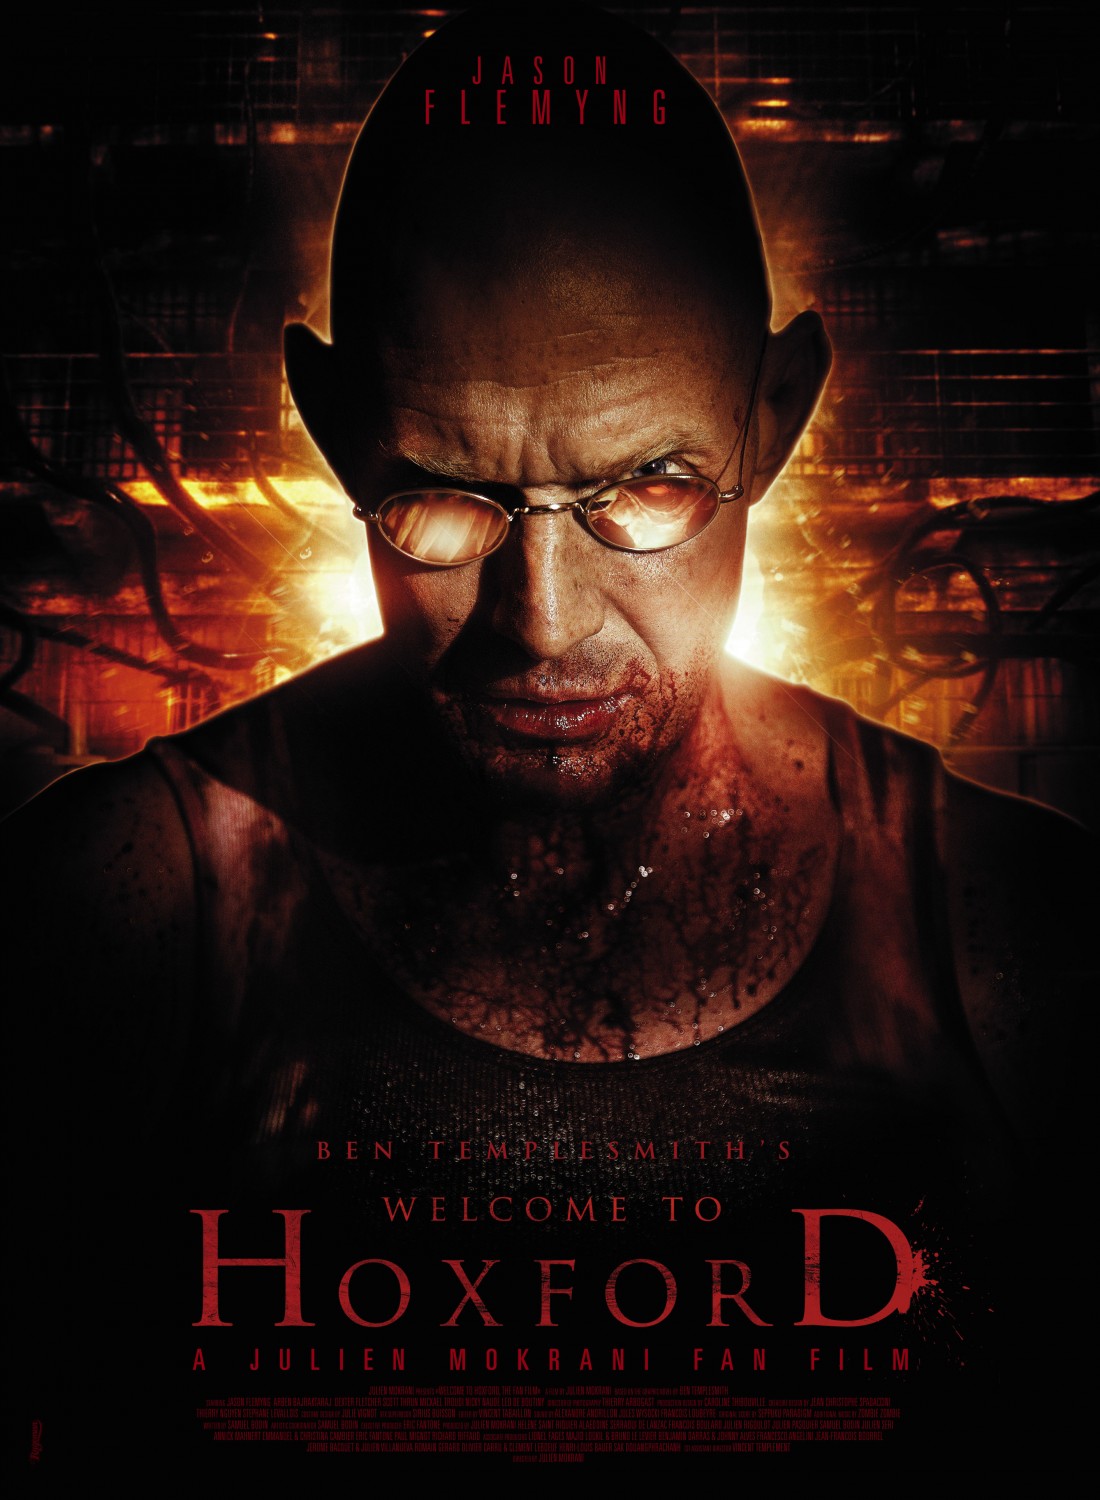 Extra Large Movie Poster Image for Welcome to Hoxford: The Fan Film